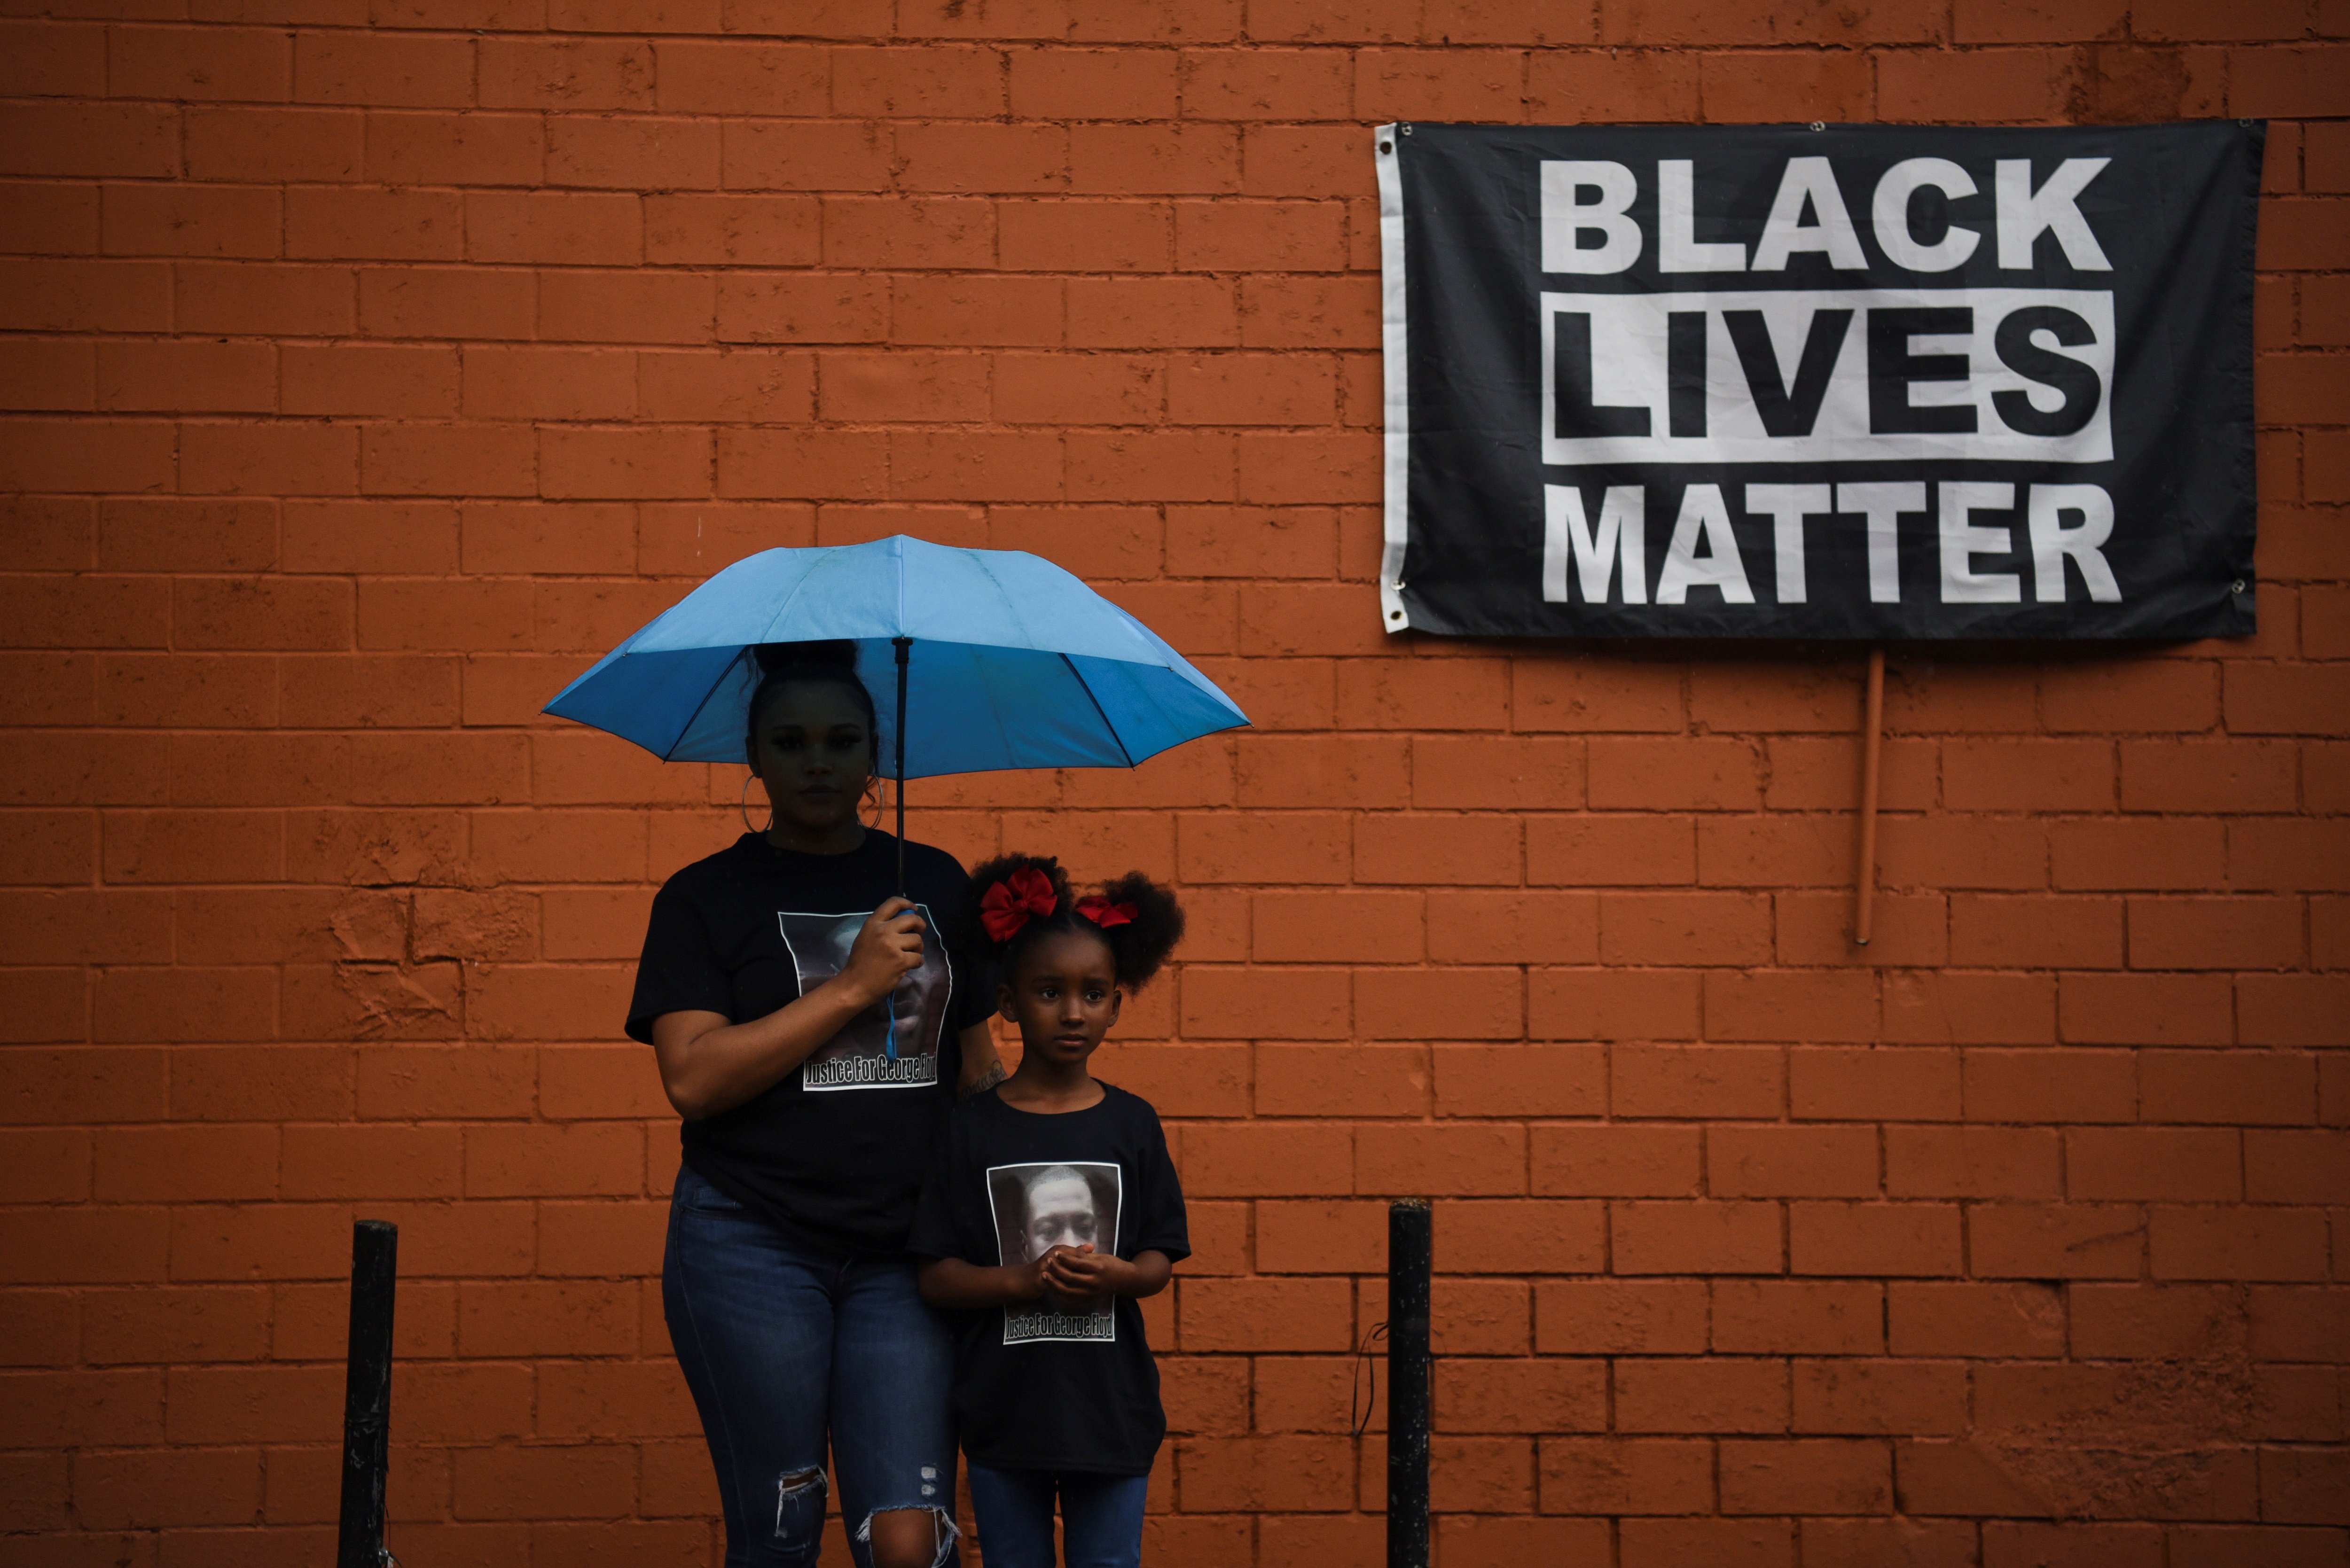 Brittany Elmore of Houston poses for a photo with her daughter Brooklyn near a "Black Lives Matter" sign May 23. (CNS)